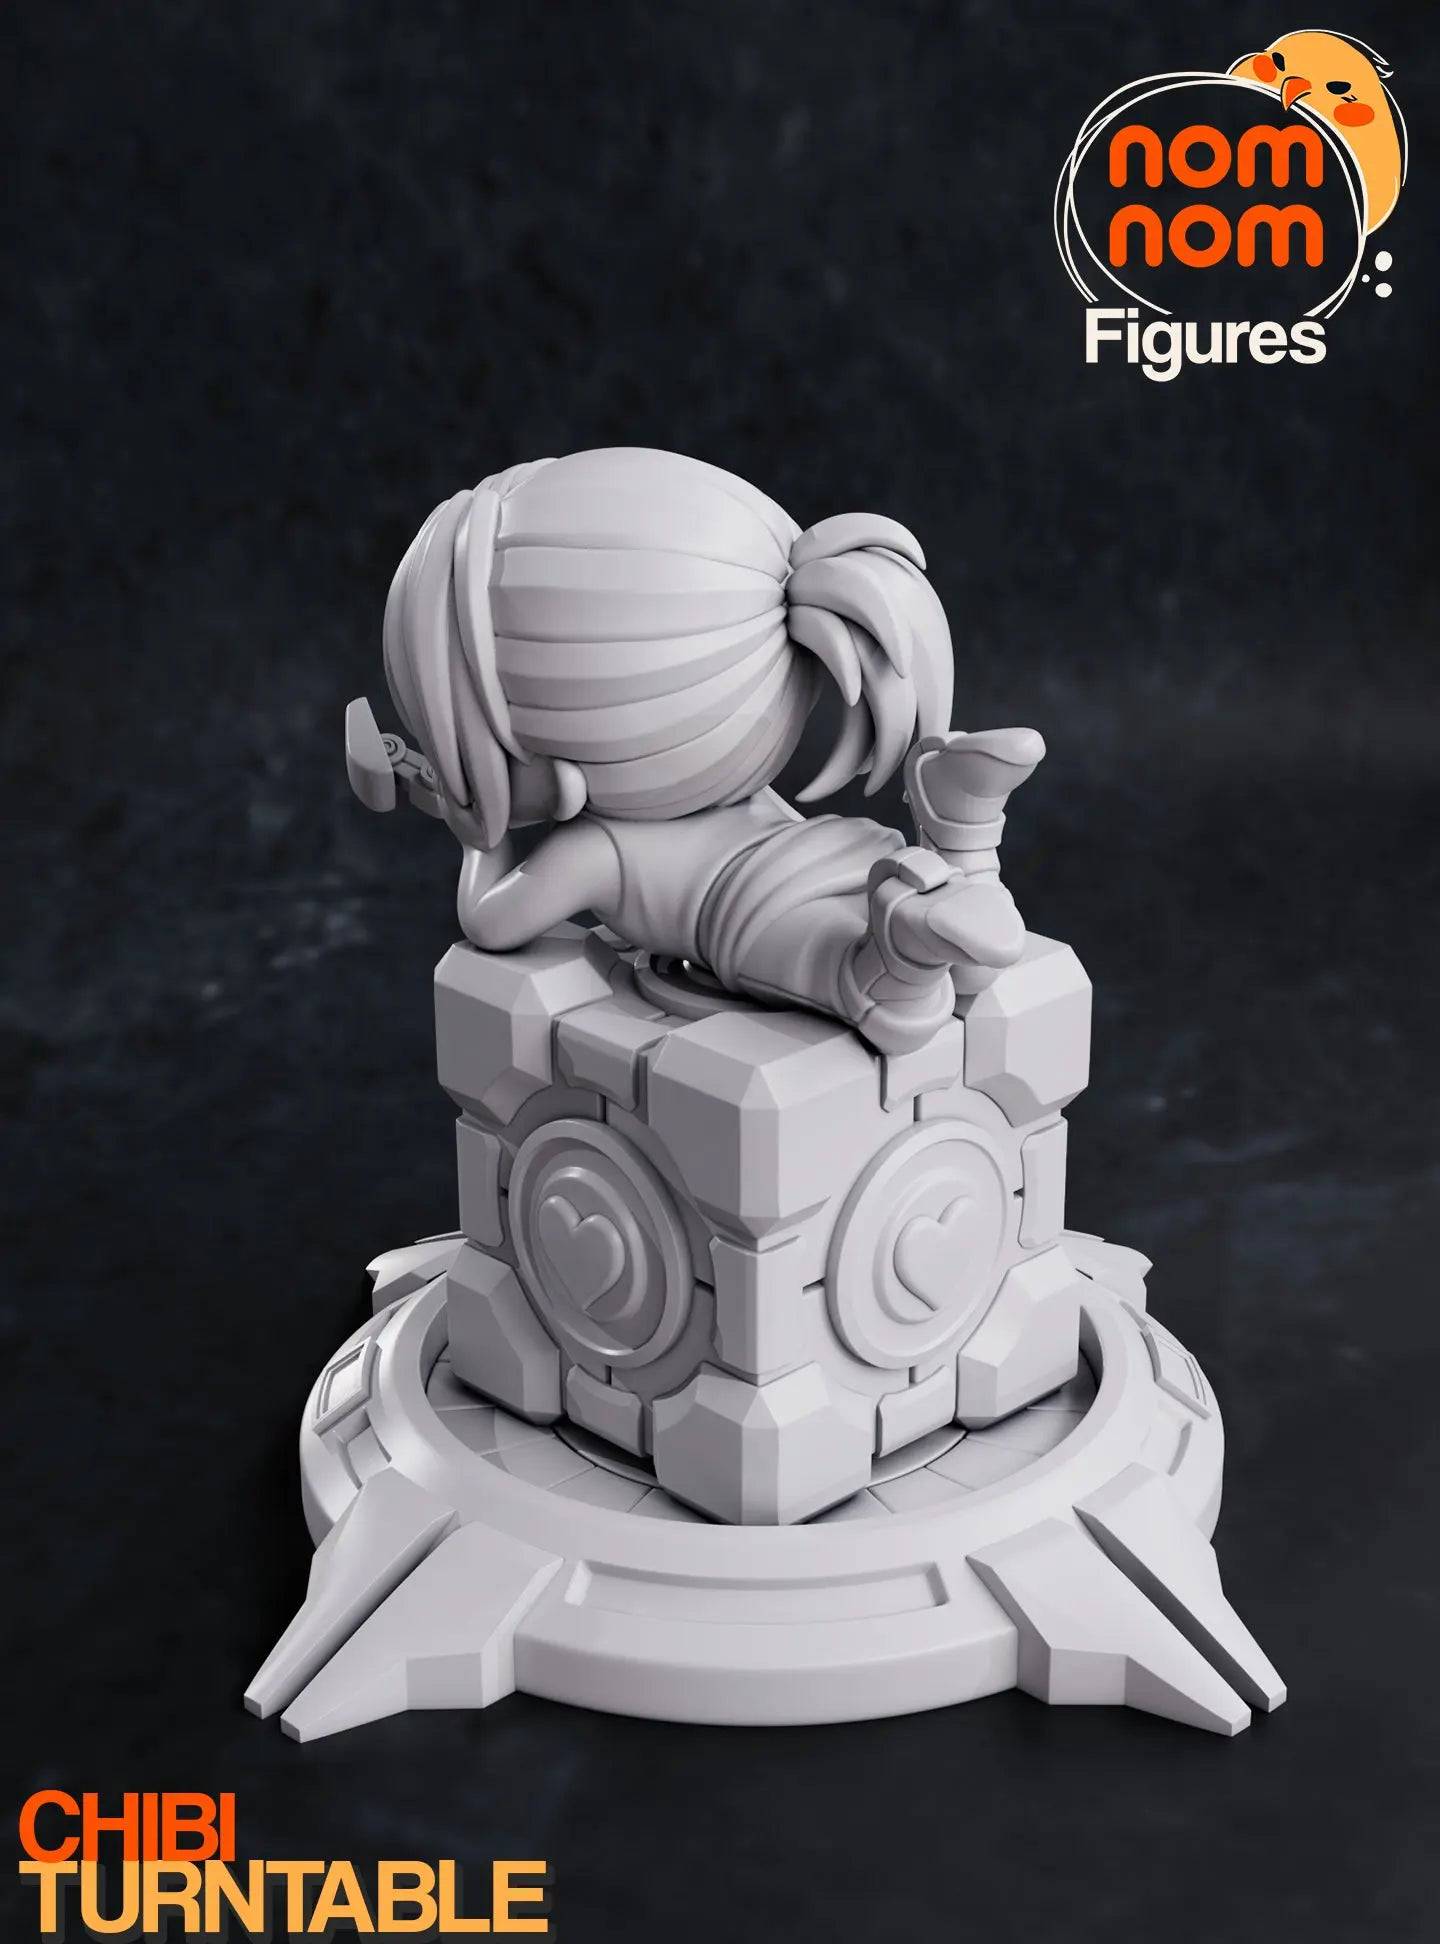 Cute and Capable Test Subject | Resin Garage Kit Sculpture Anime Video Game Fan Art Statue | Nomnom Figures - Tattles Told 3D